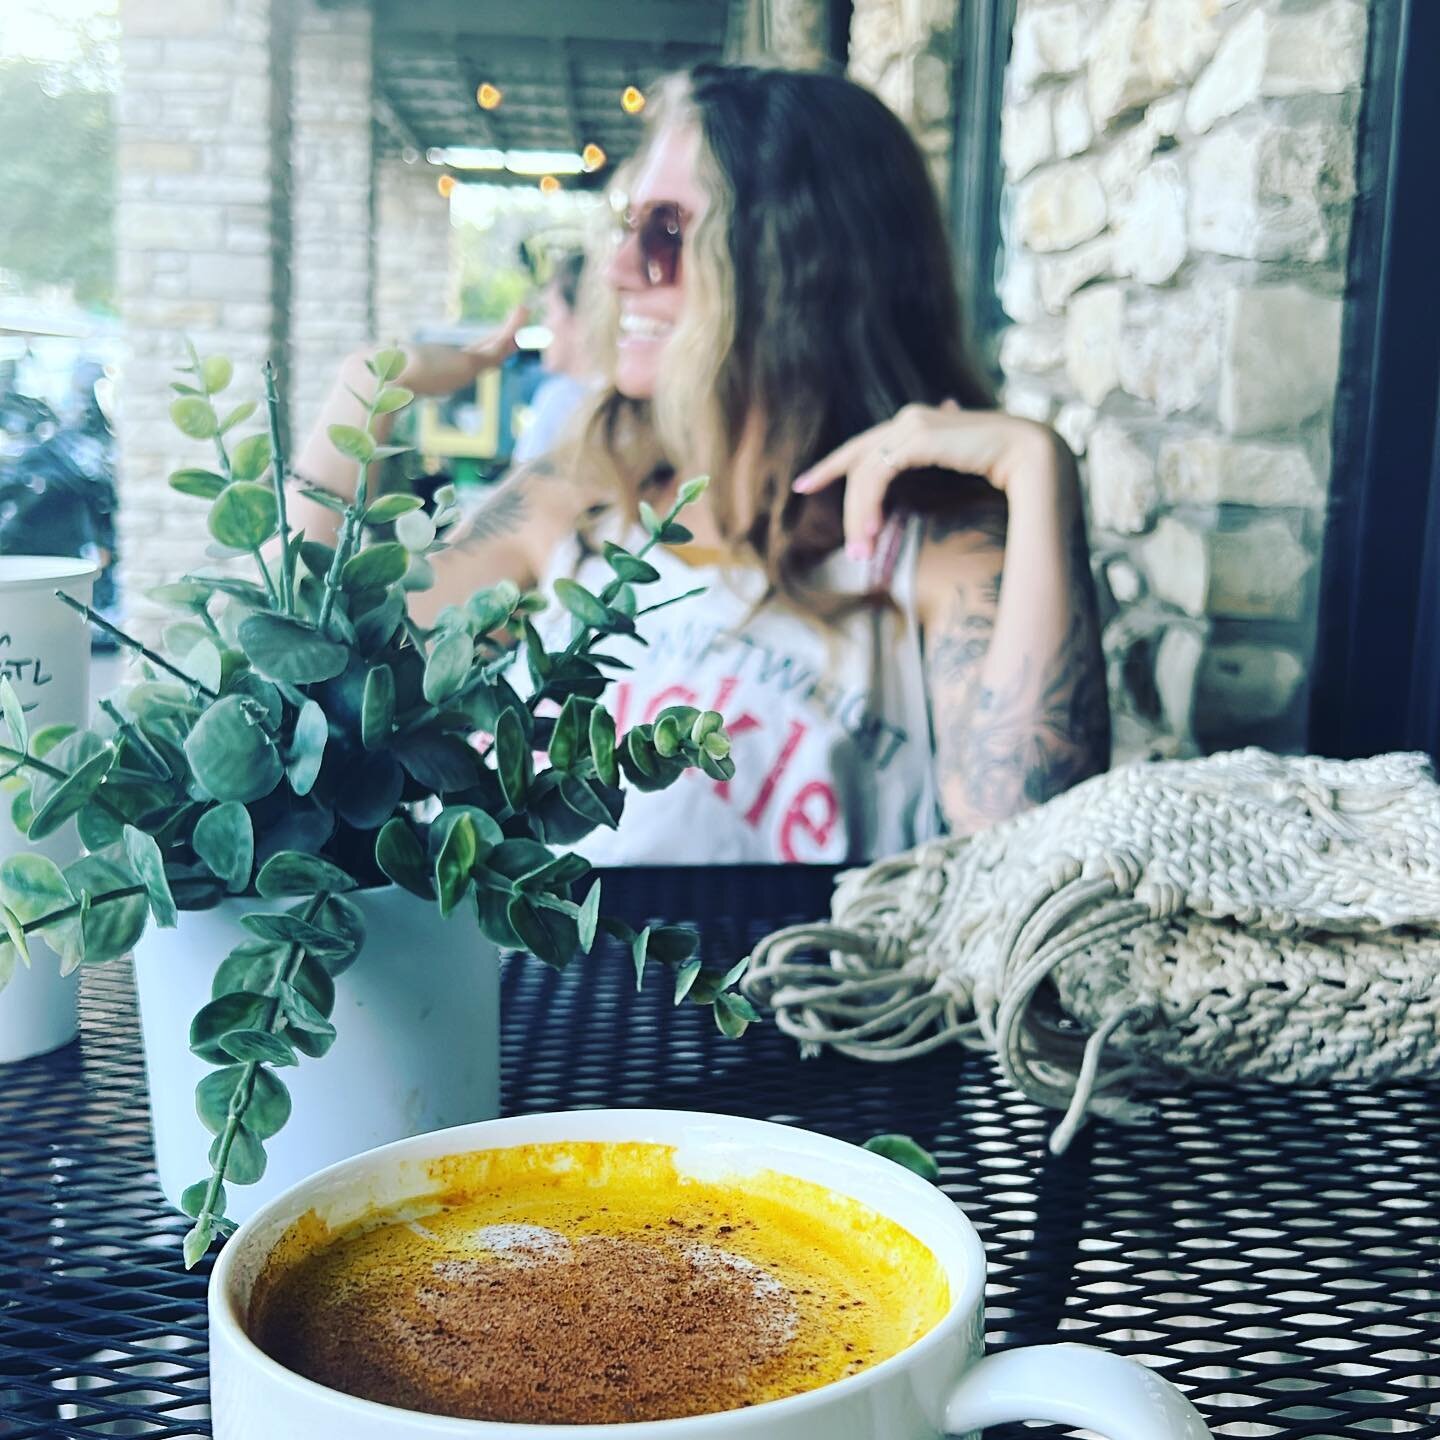 A turmeric latte and good friends for this beautiful Saturday morning! Always love hangin with @marinawanders. She&rsquo;s a great woman and friend! Show tonight at Stubbs with the @bandofheathens. #nicesaturdays